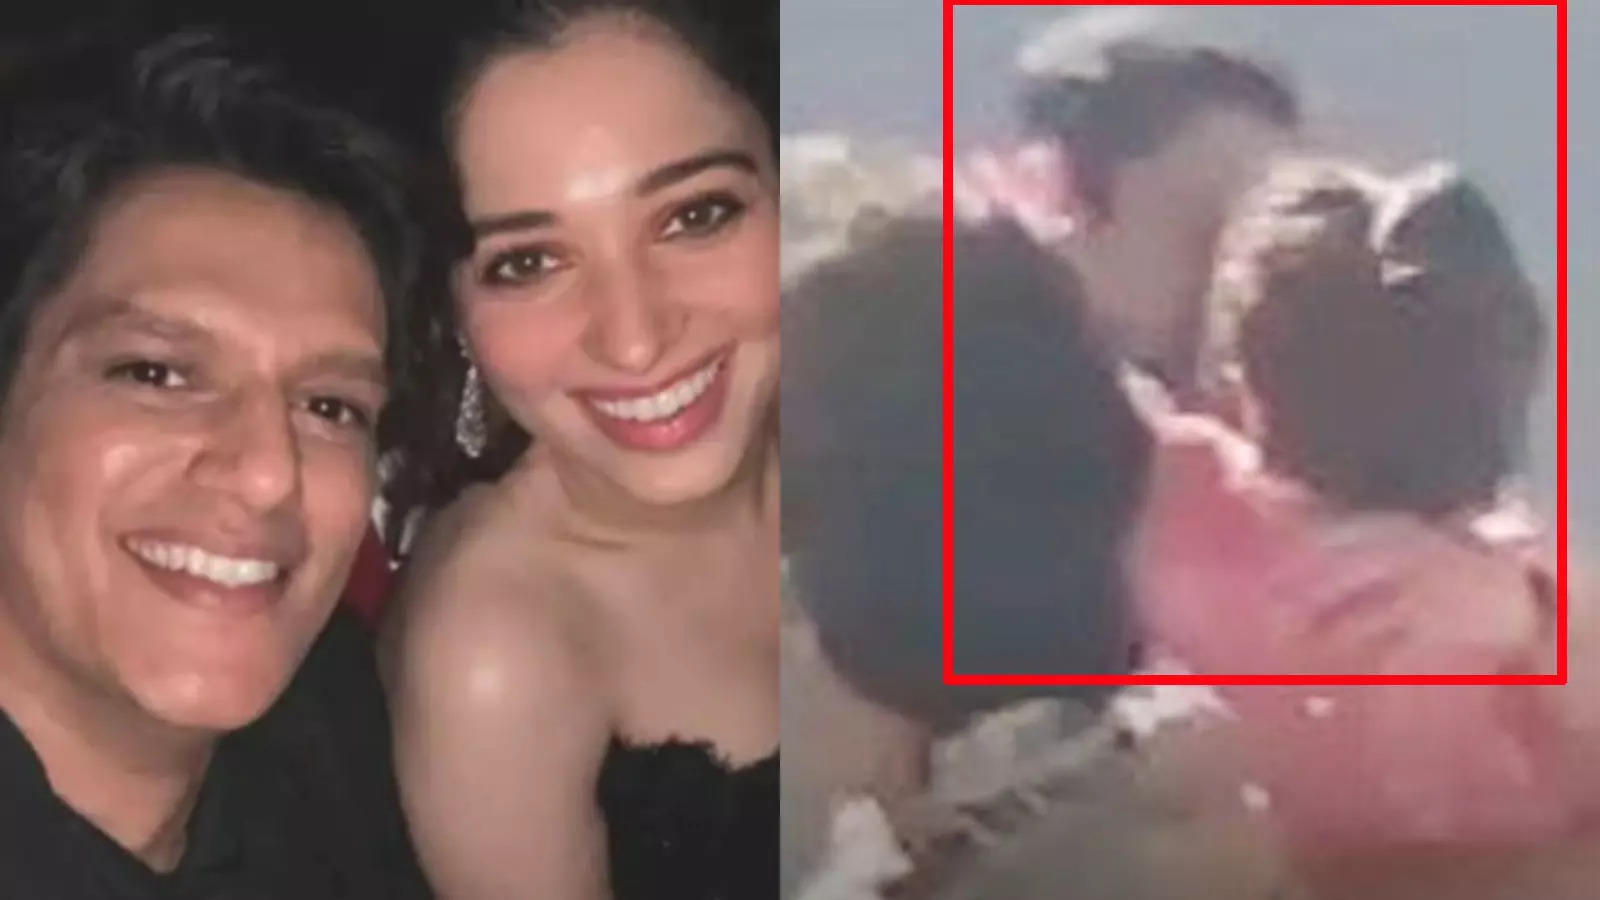 Tamannaah-Vijay Kissing Video: Amid dating reports, 'Baahubali' actress Tamannaah Bhatia and Vijay Varma spotted 'kissing each other' as they welcome 2023 in this VIRAL video